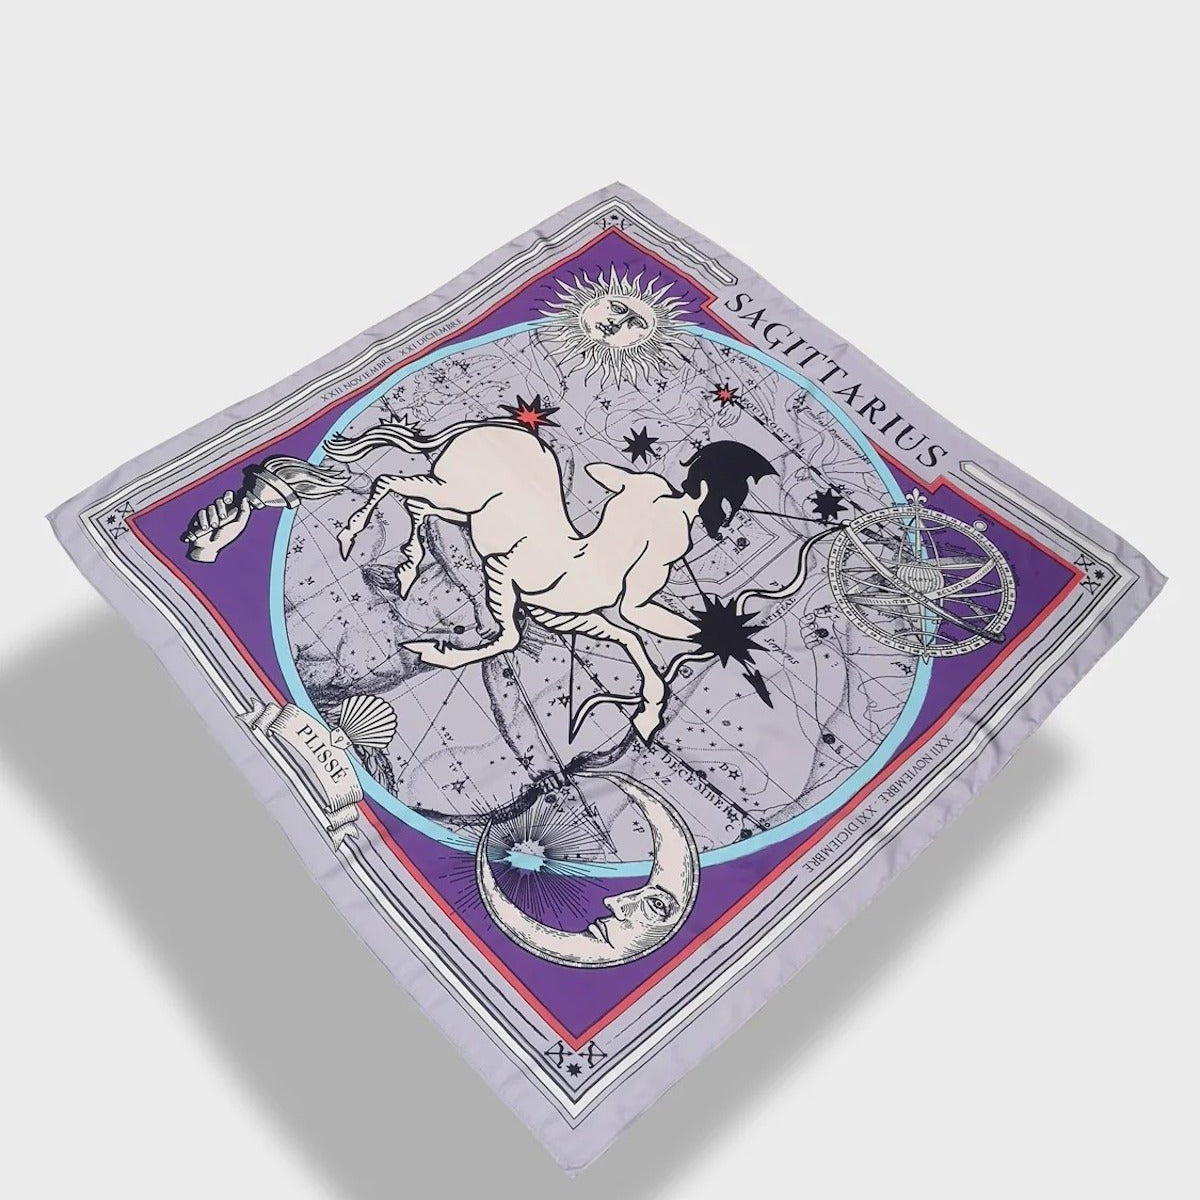 Zodiac Scarf for Sagittarius. Image of Archer, Sun, Moon, and astrological background with deep purple tones. Scarf floating on plain white background.